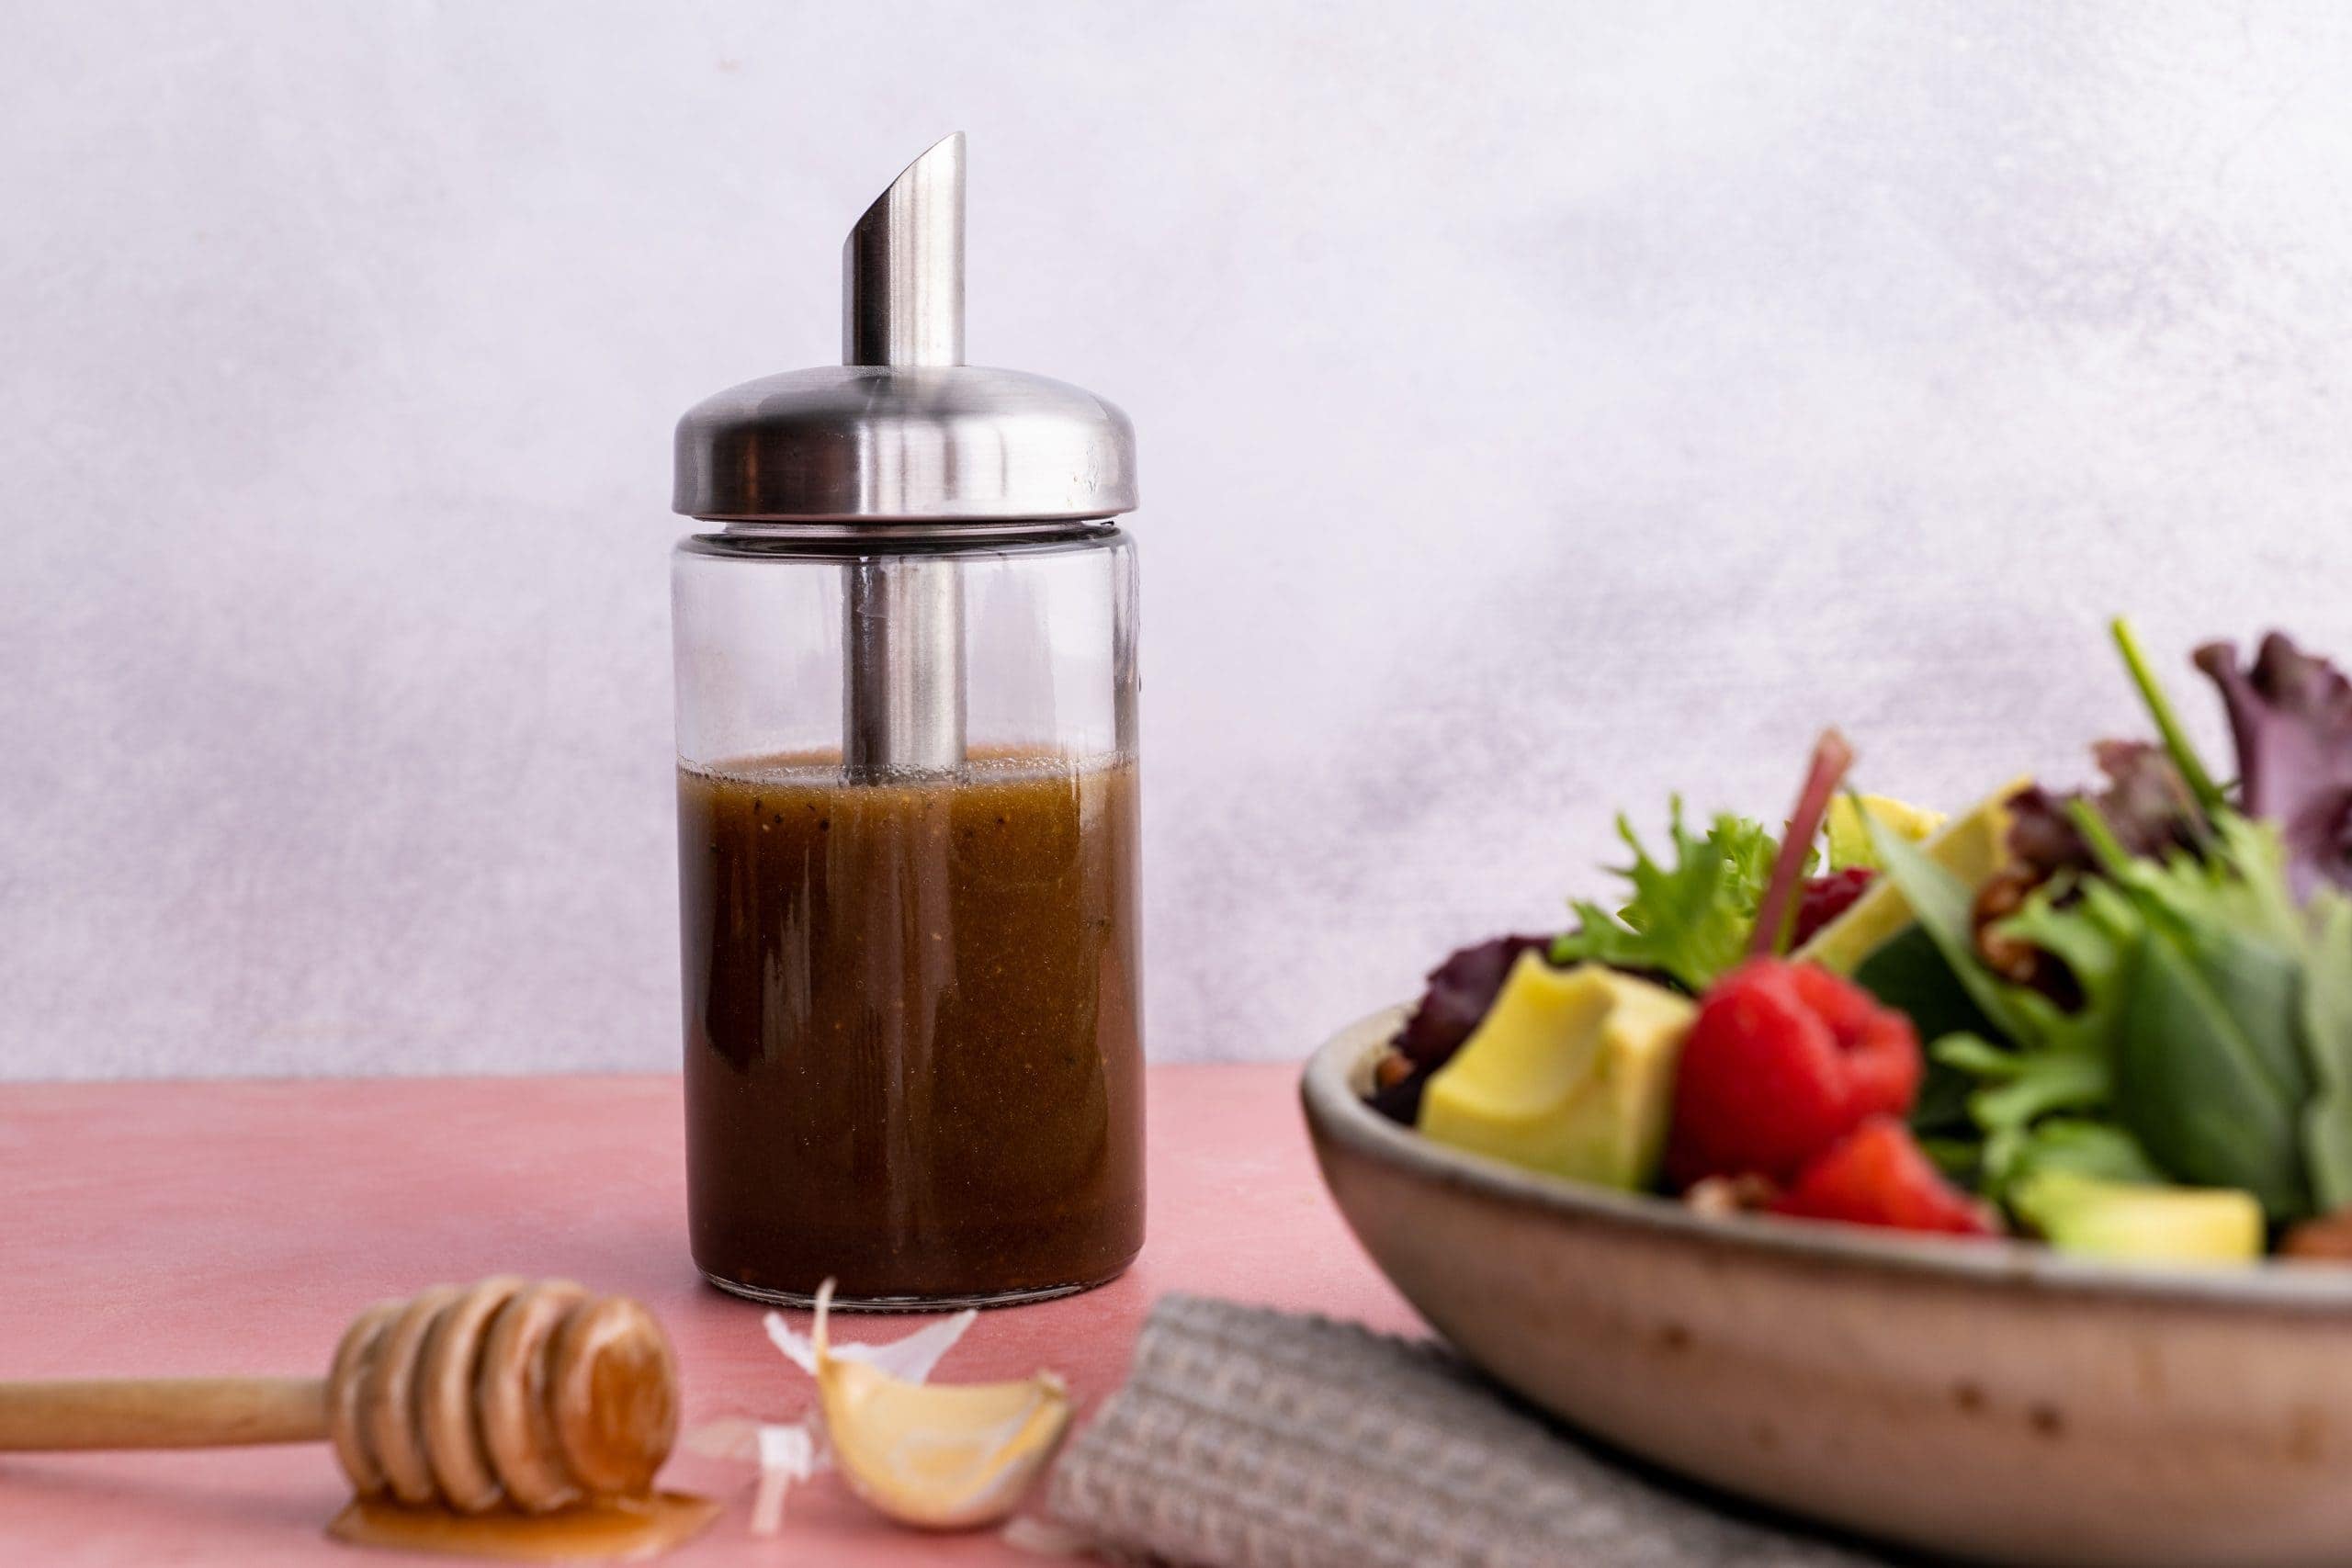 A glass cruet filled with balsamic vinaigrette stands beside a salad bowl filled with fresh ingredients.